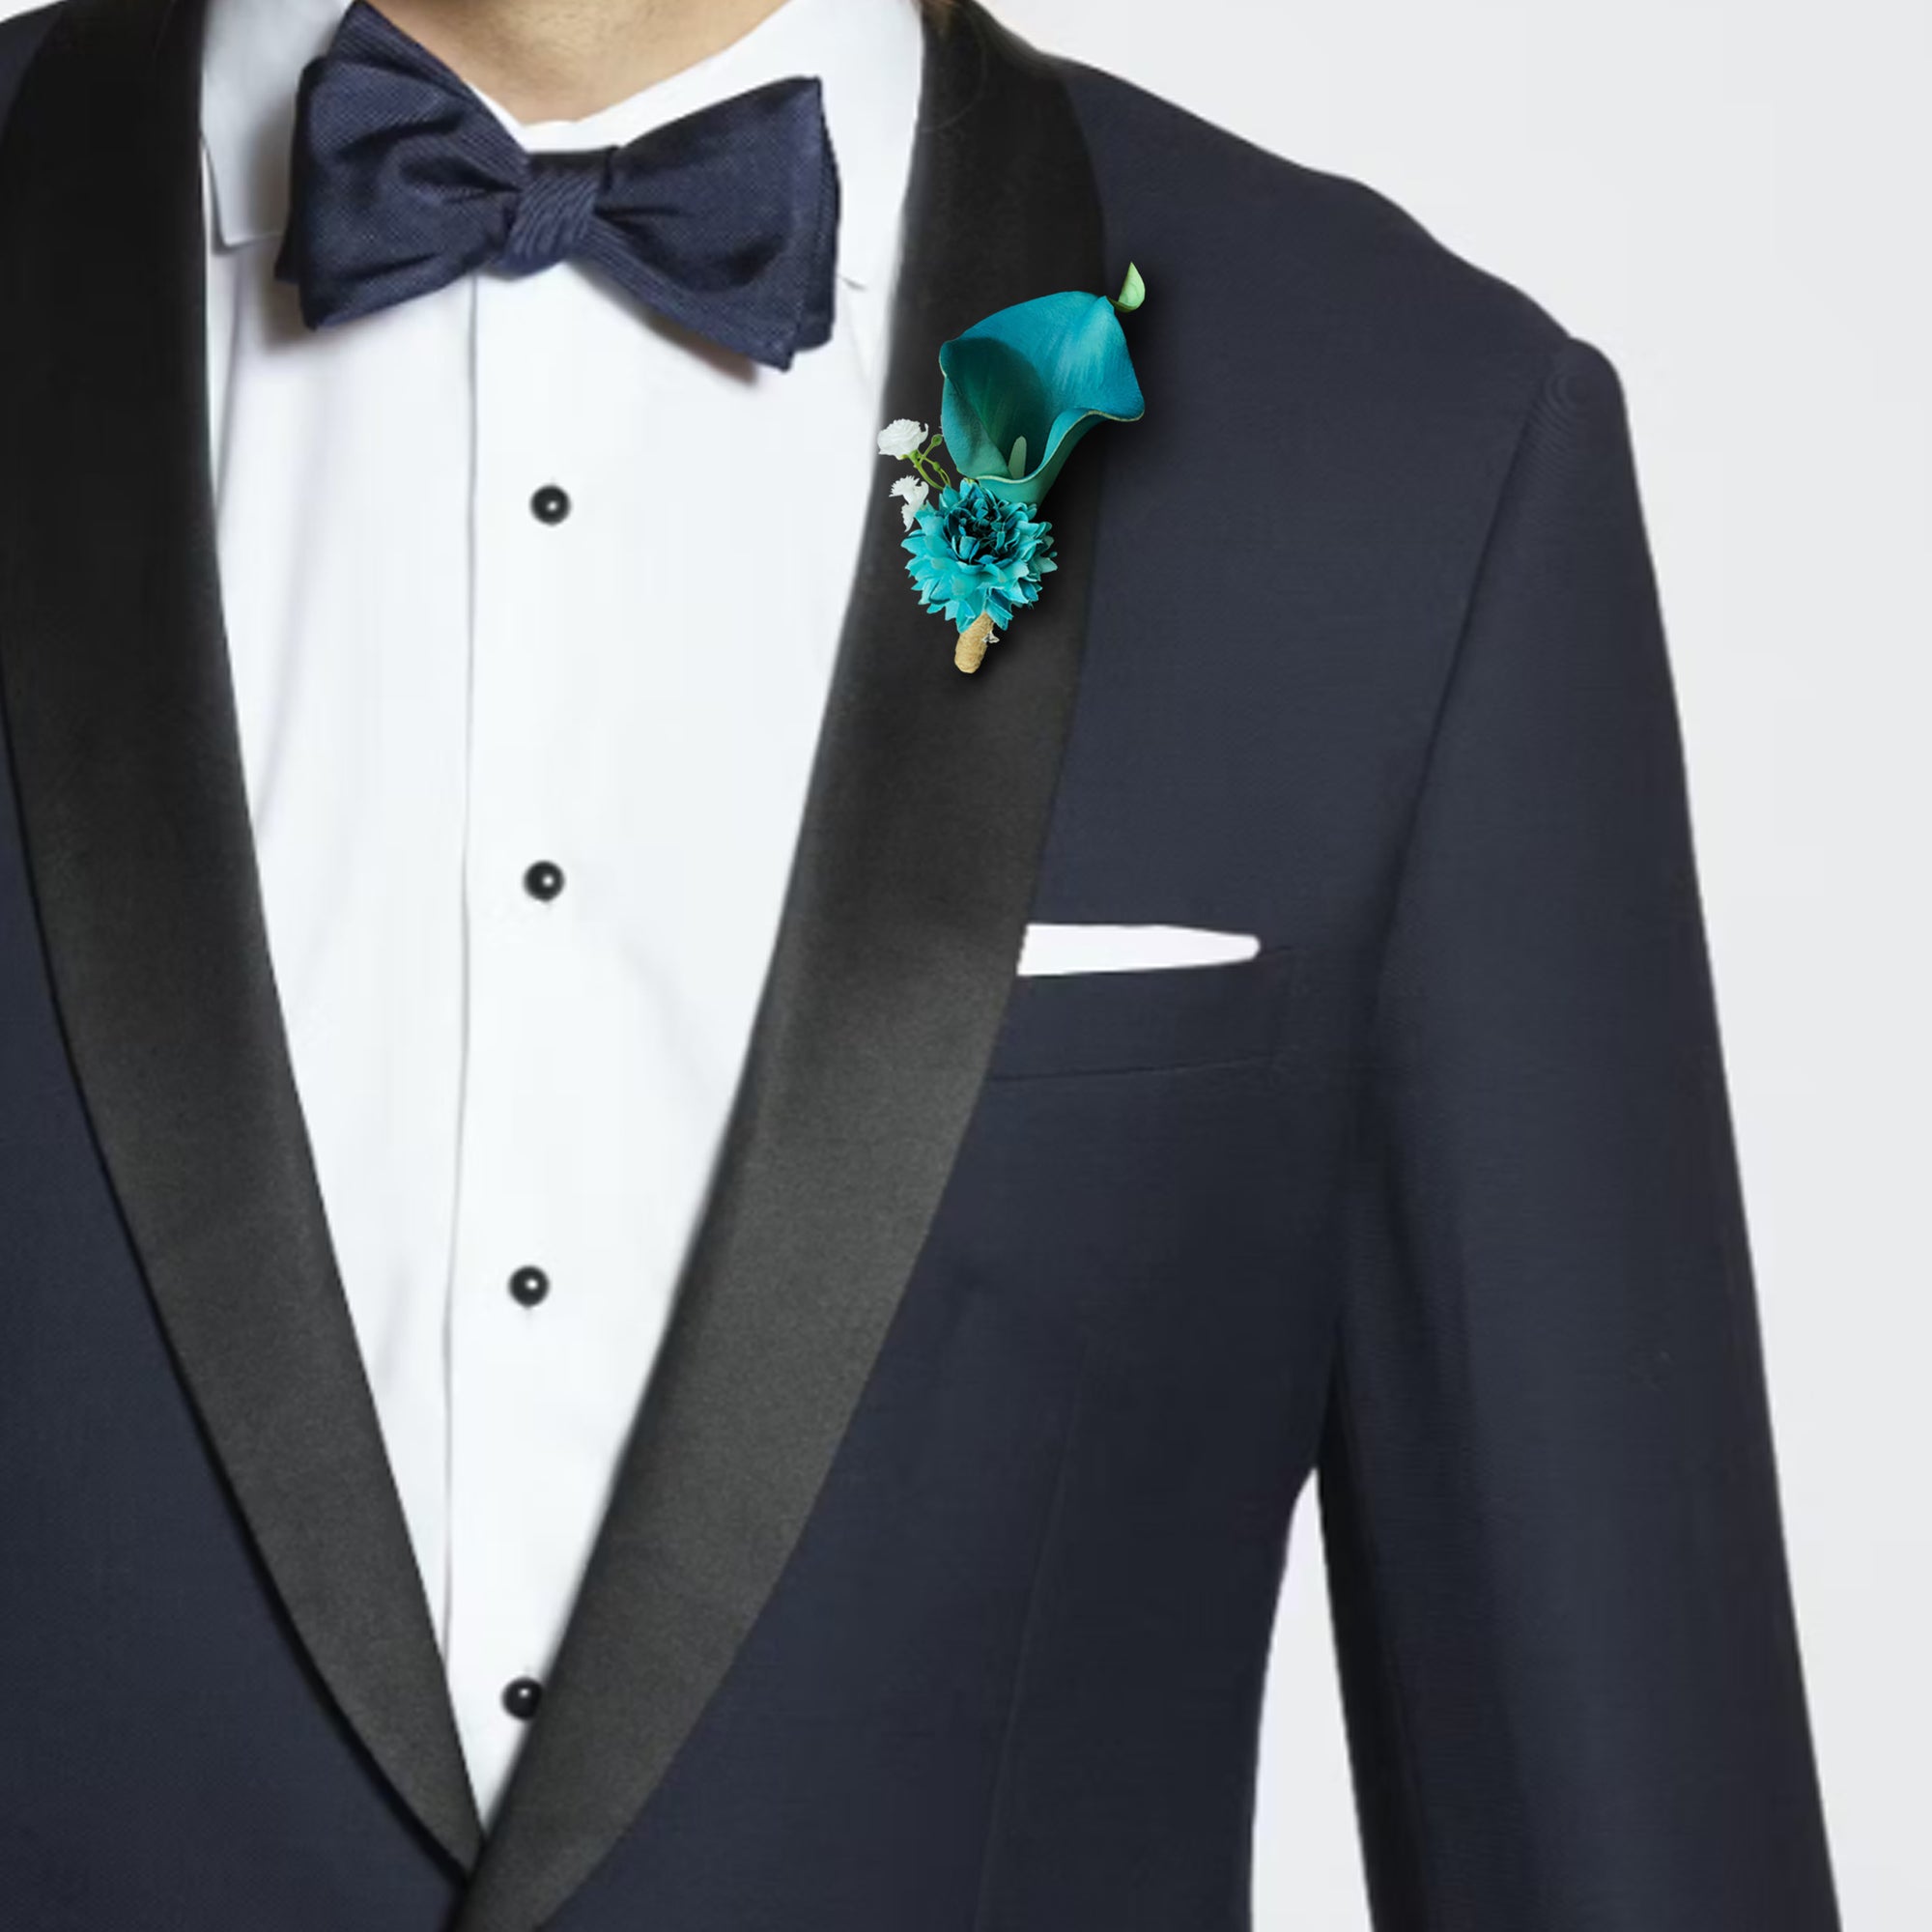 Turquoise Wedding Boutonniere Flower Calla Lily